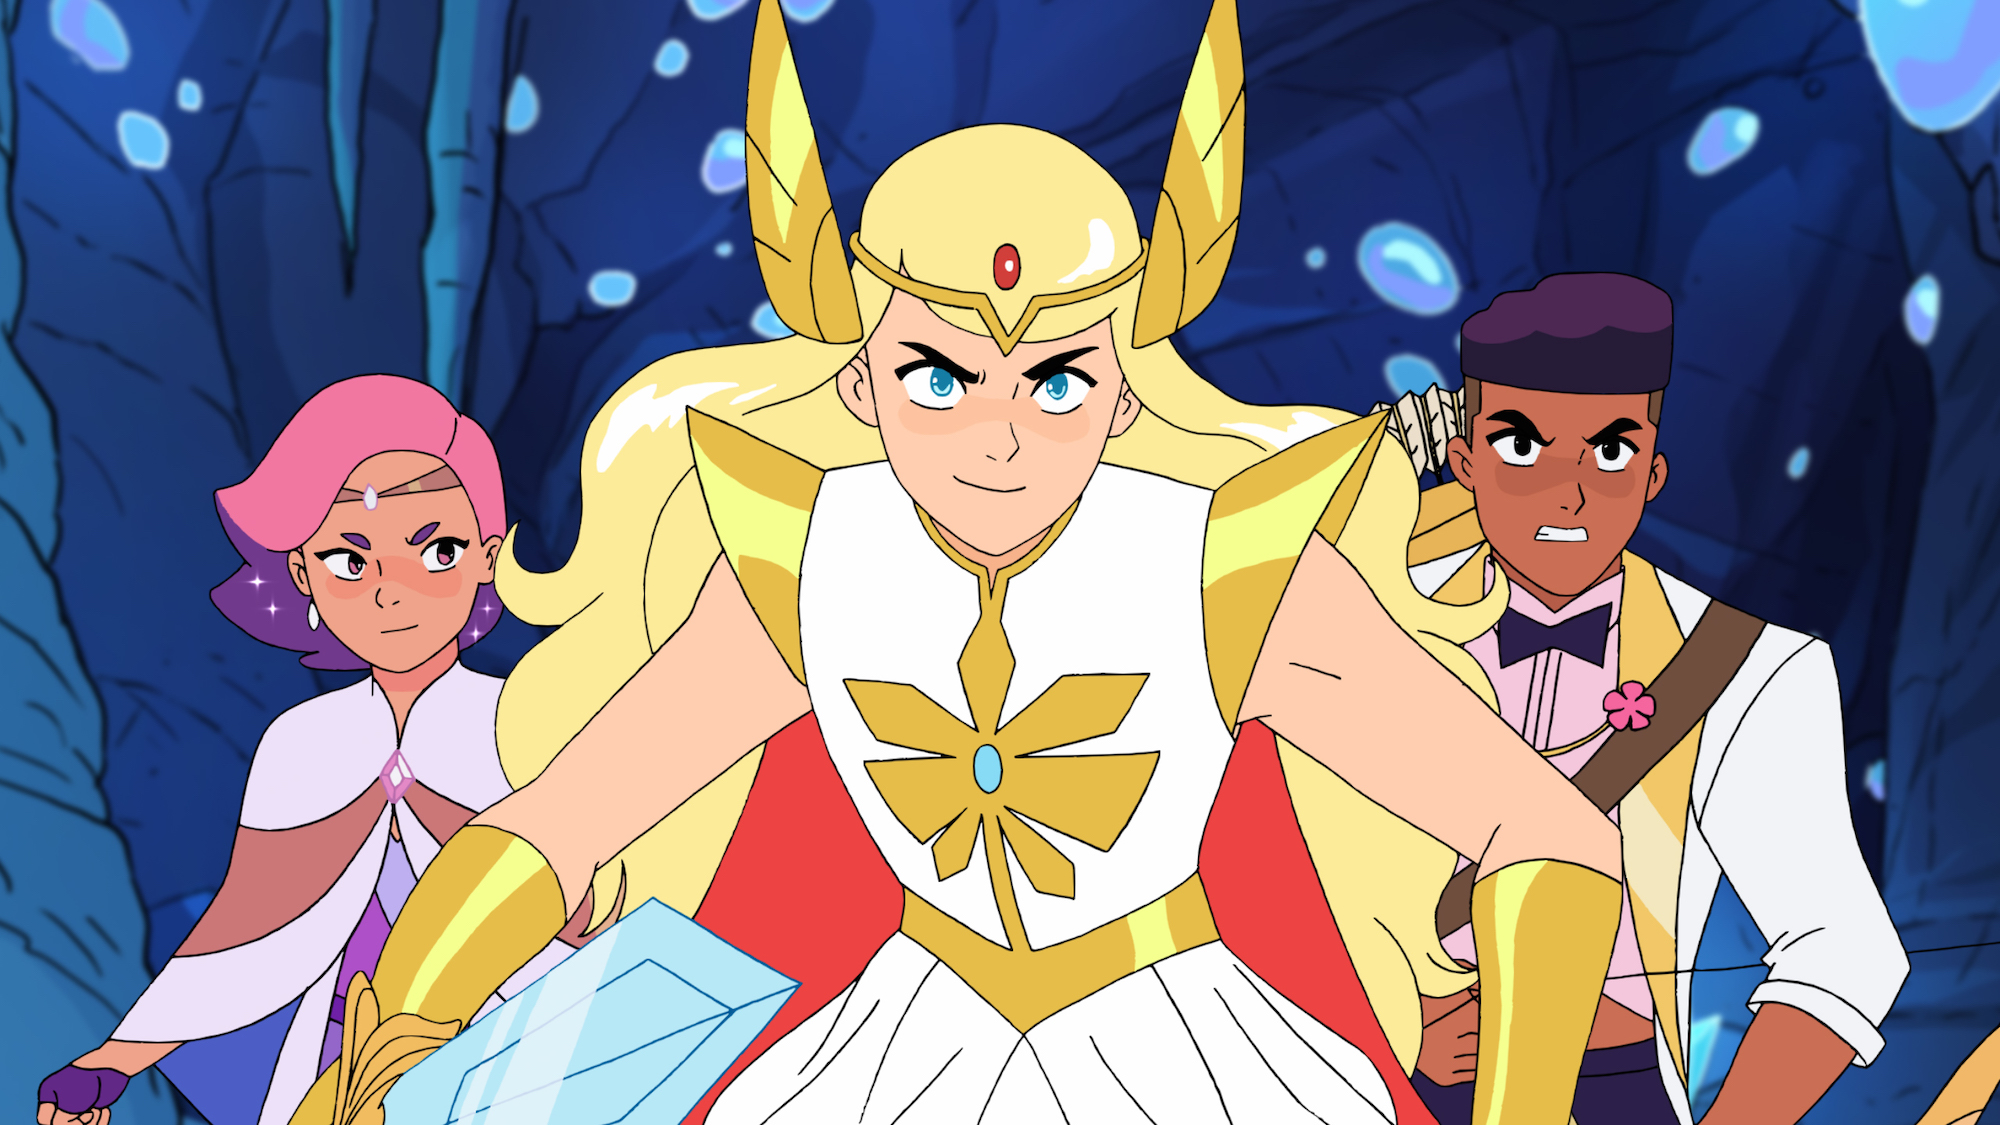 Glimmer, Adora/She-Ra, and Bow in Season 4 